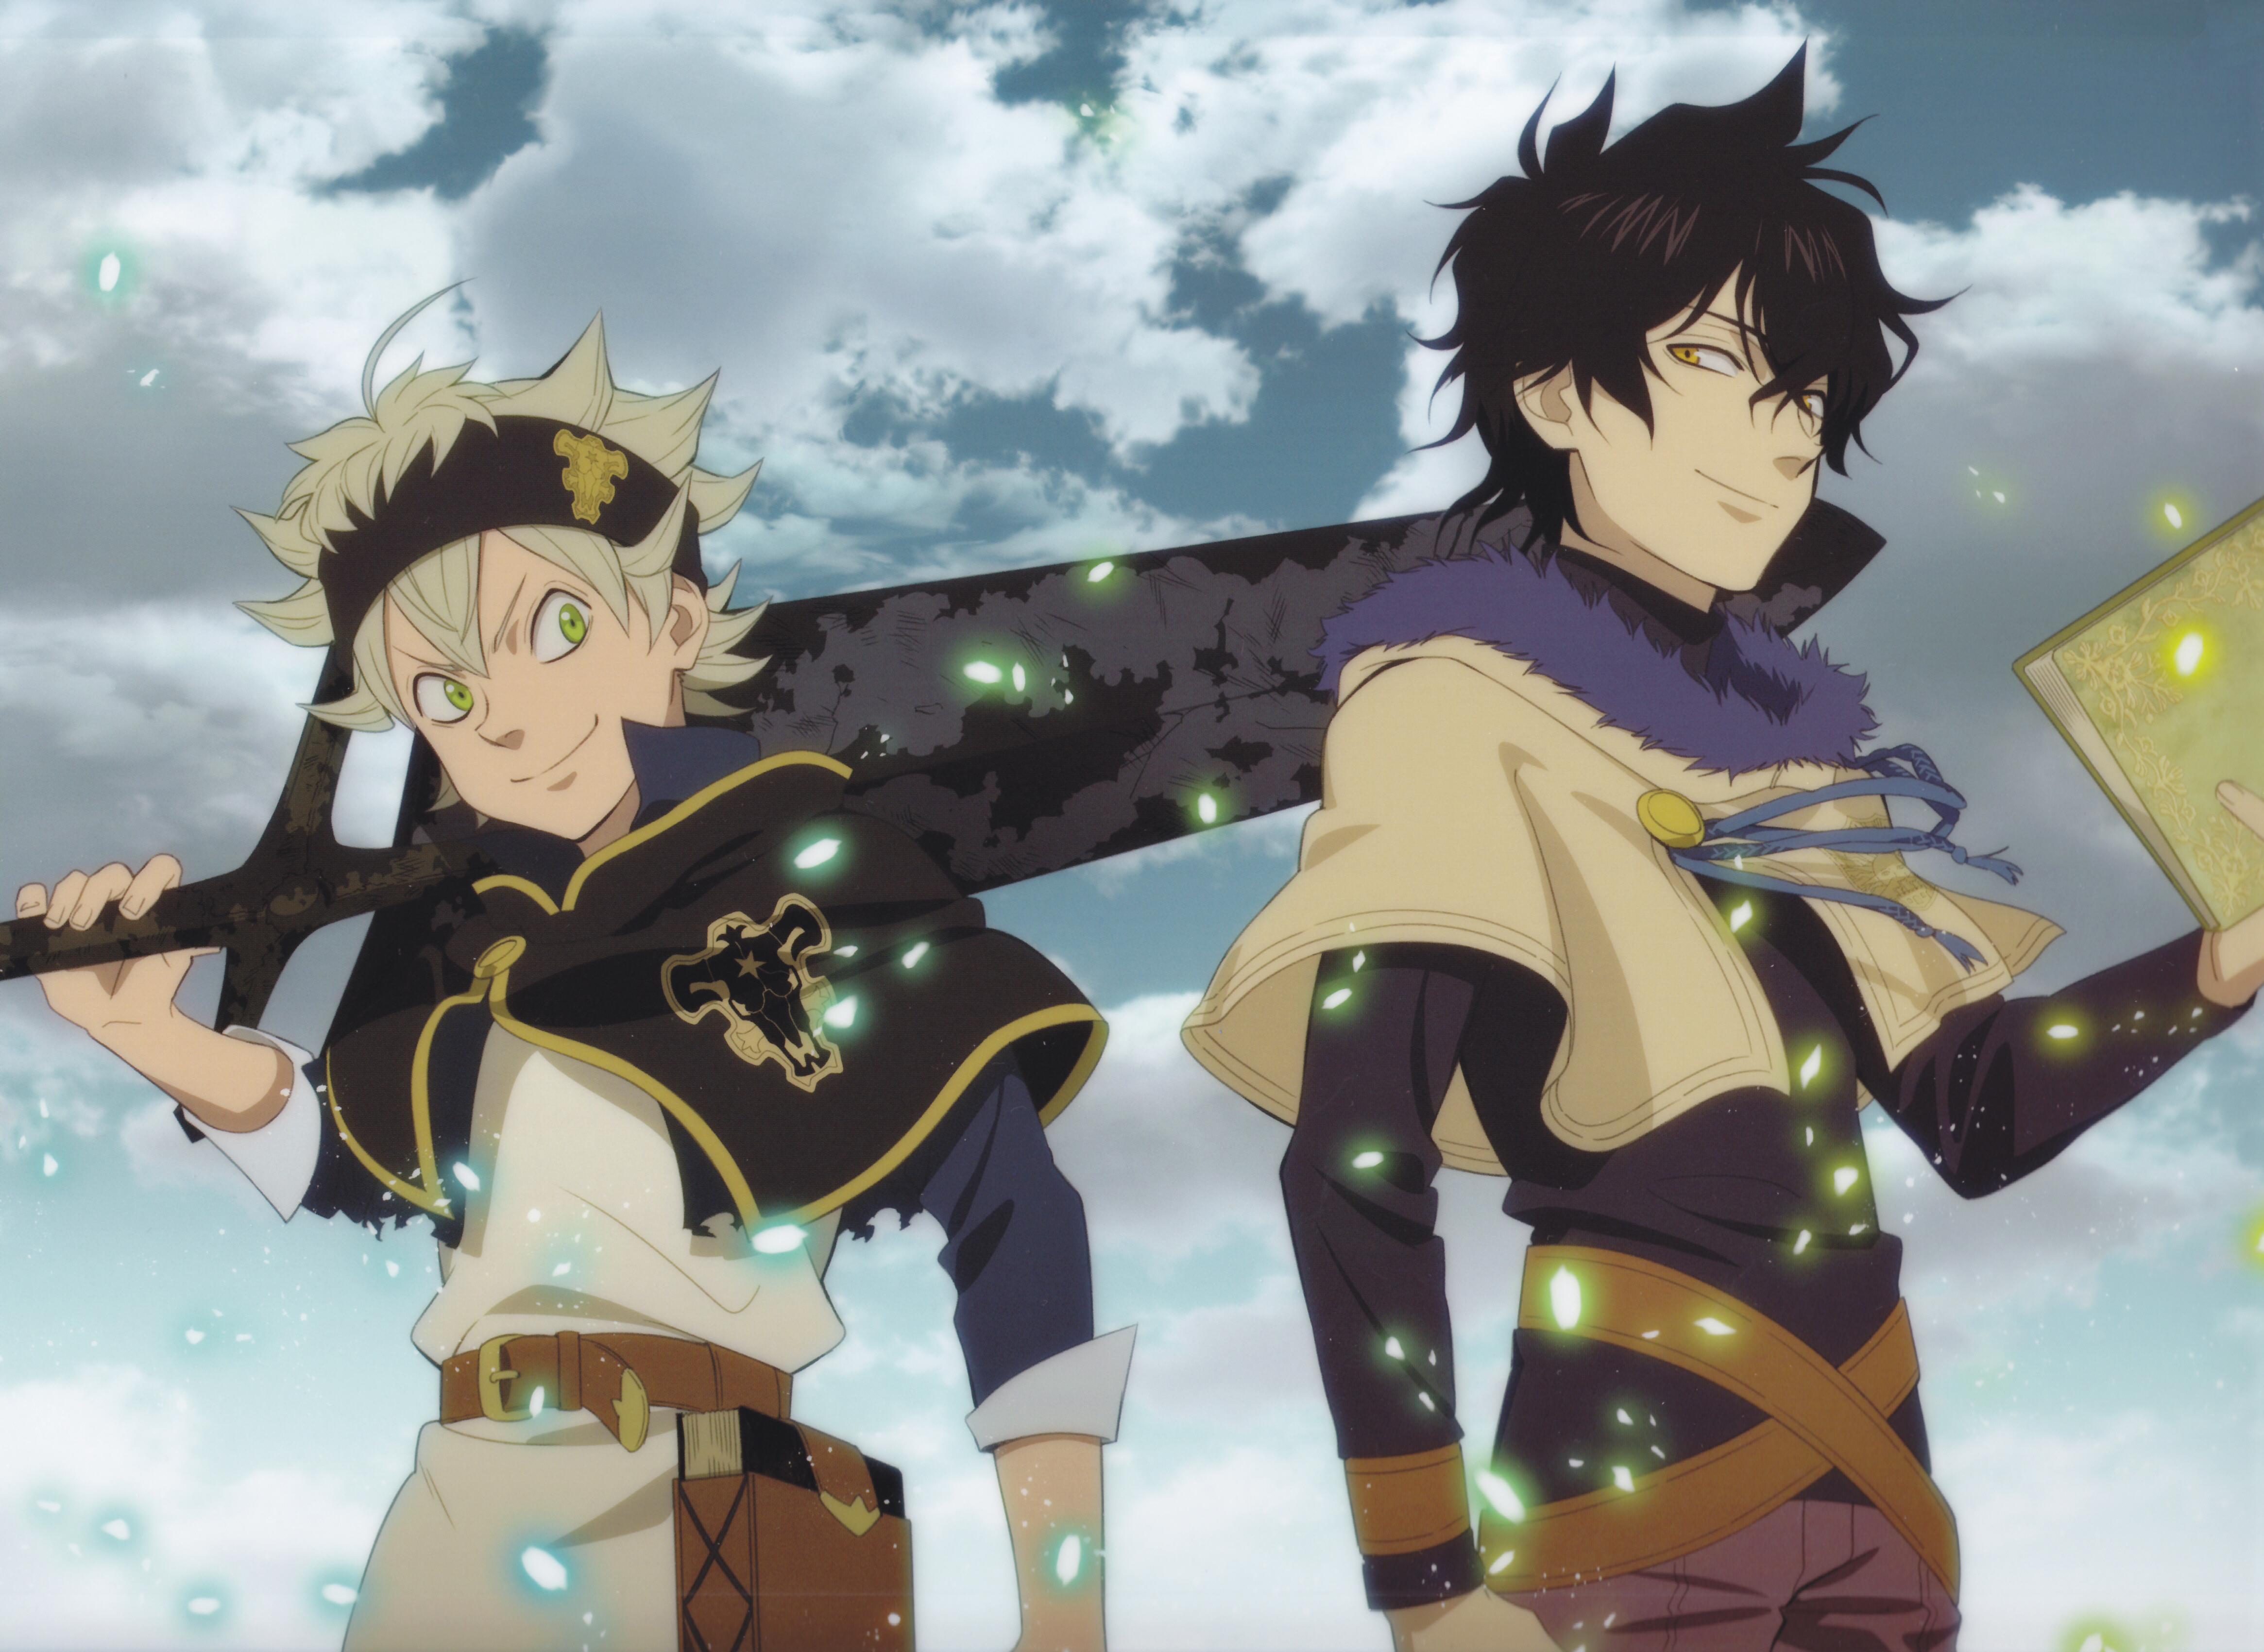 Black Clover Wallpaper for mobile phone tablet desktop computer and other  devices HD and   Red and black wallpaper Black clover anime Anime  computer wallpaper